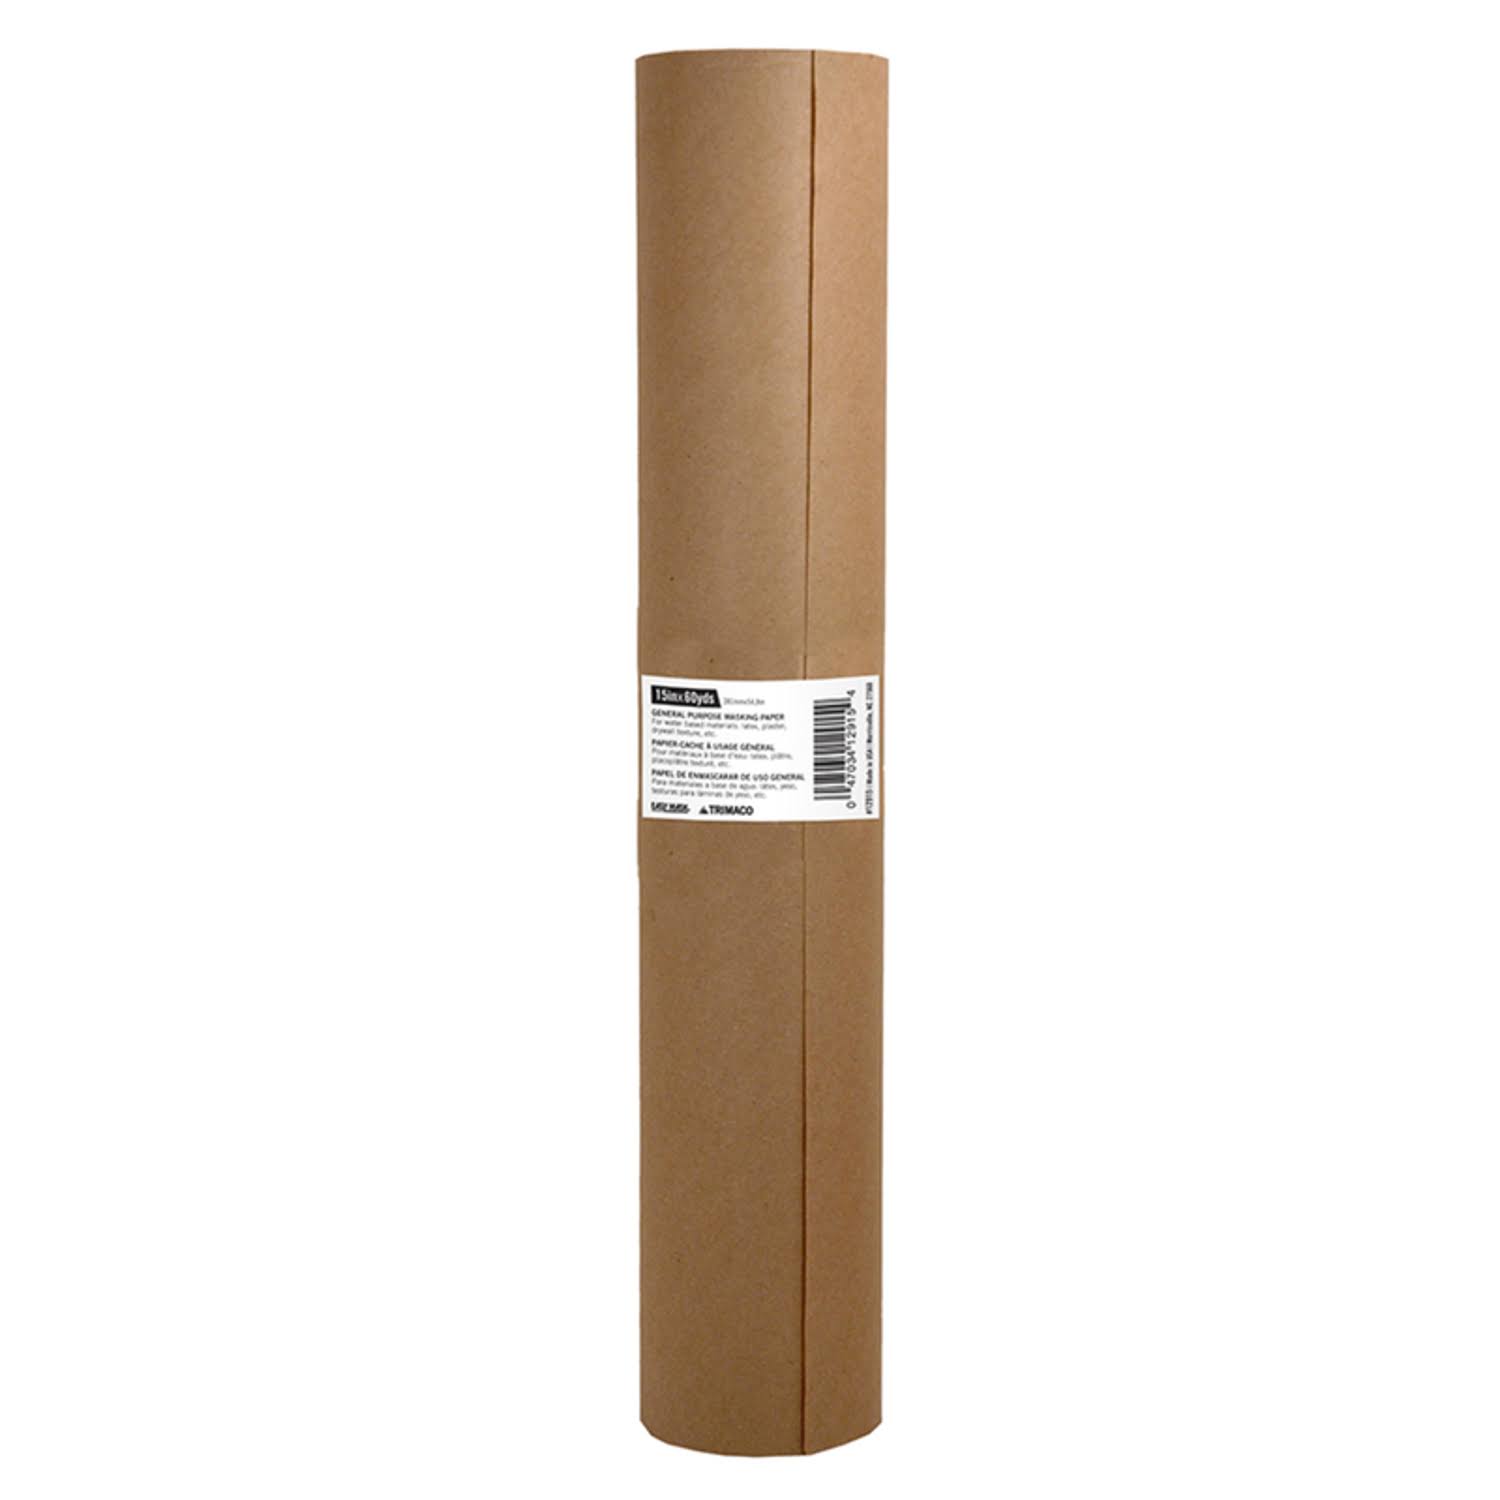 Trimaco Masking Paper - Brown 15 in x 180 ft